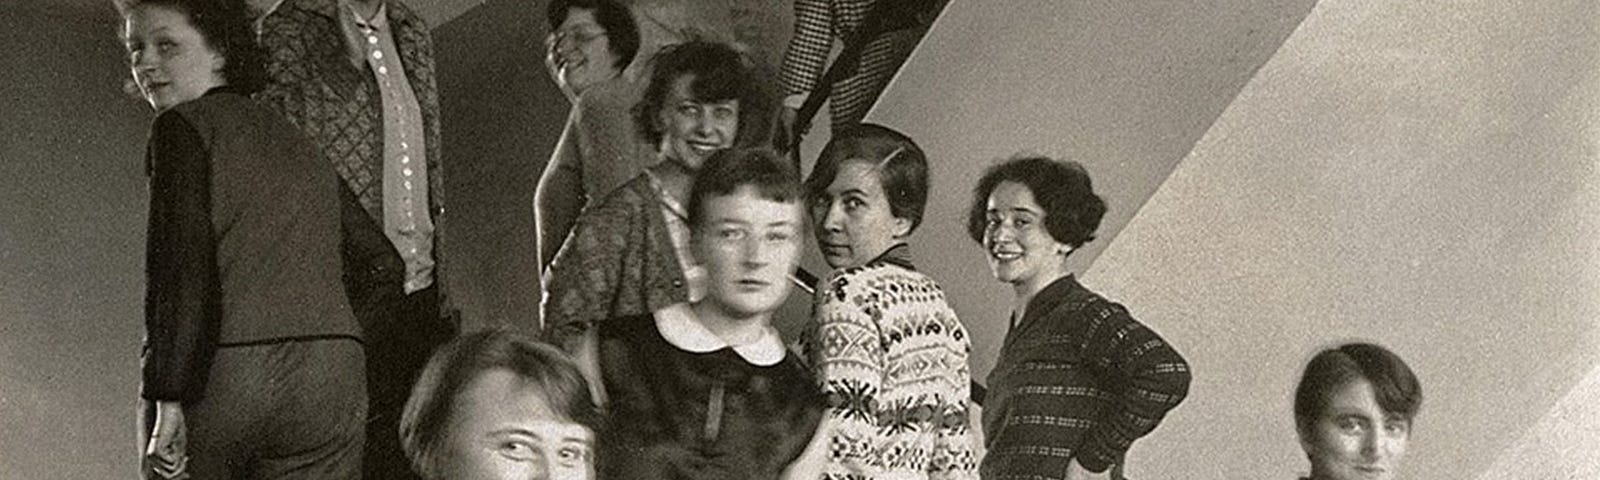 The women of the Bauhaus on the stairs in Dessau.